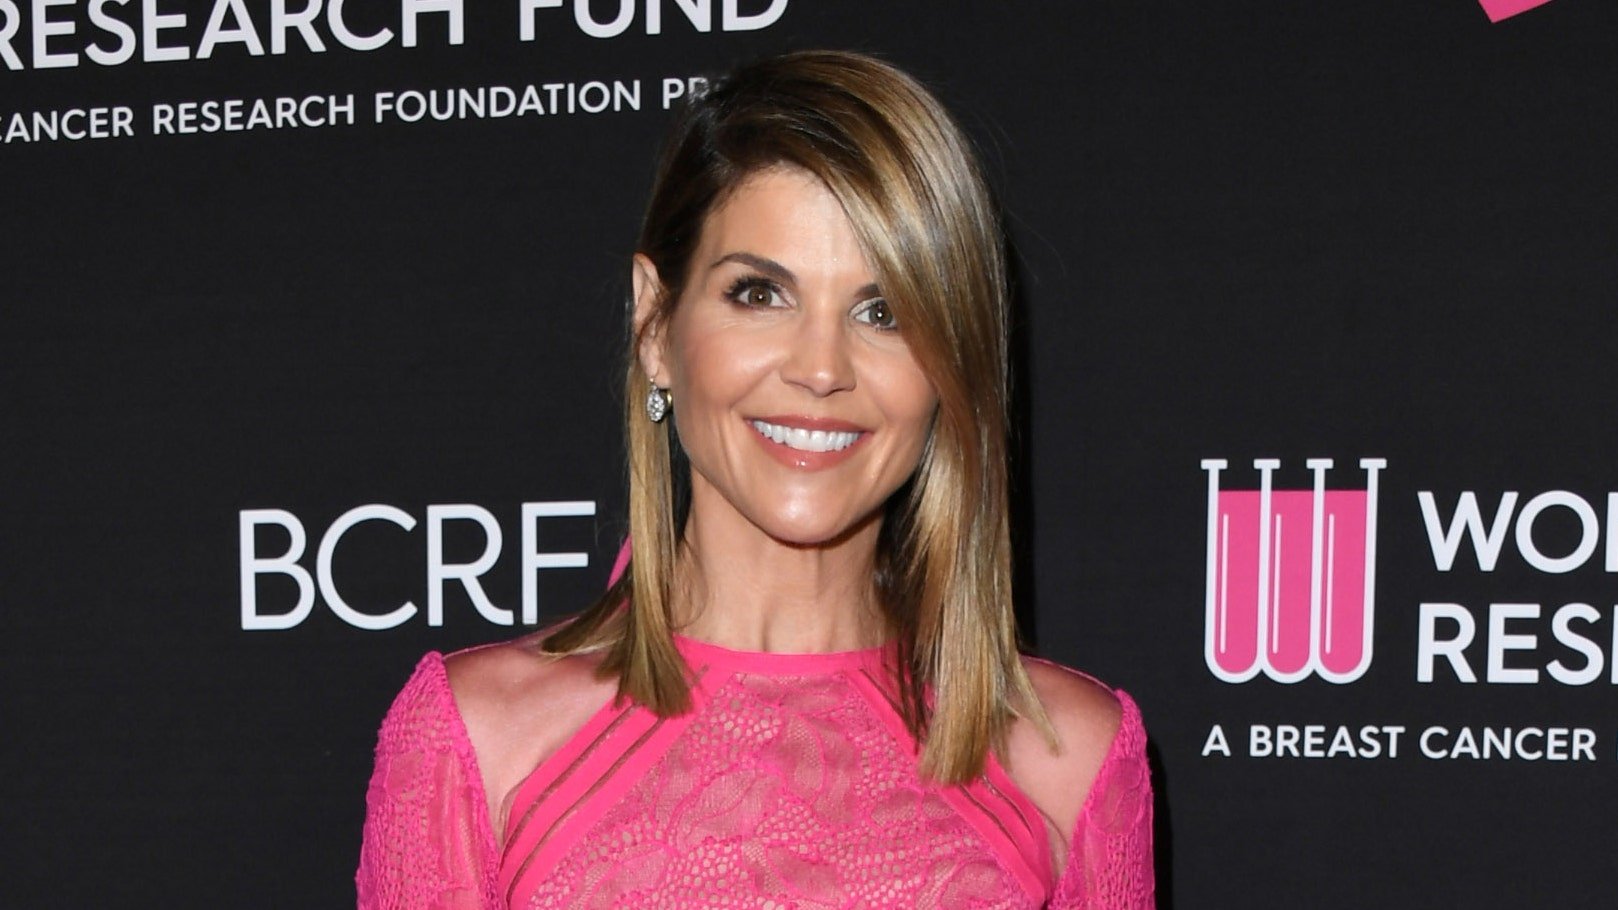 Lori Loughlin released from prison after serving 2 months behind bars for role in college admissions scandal